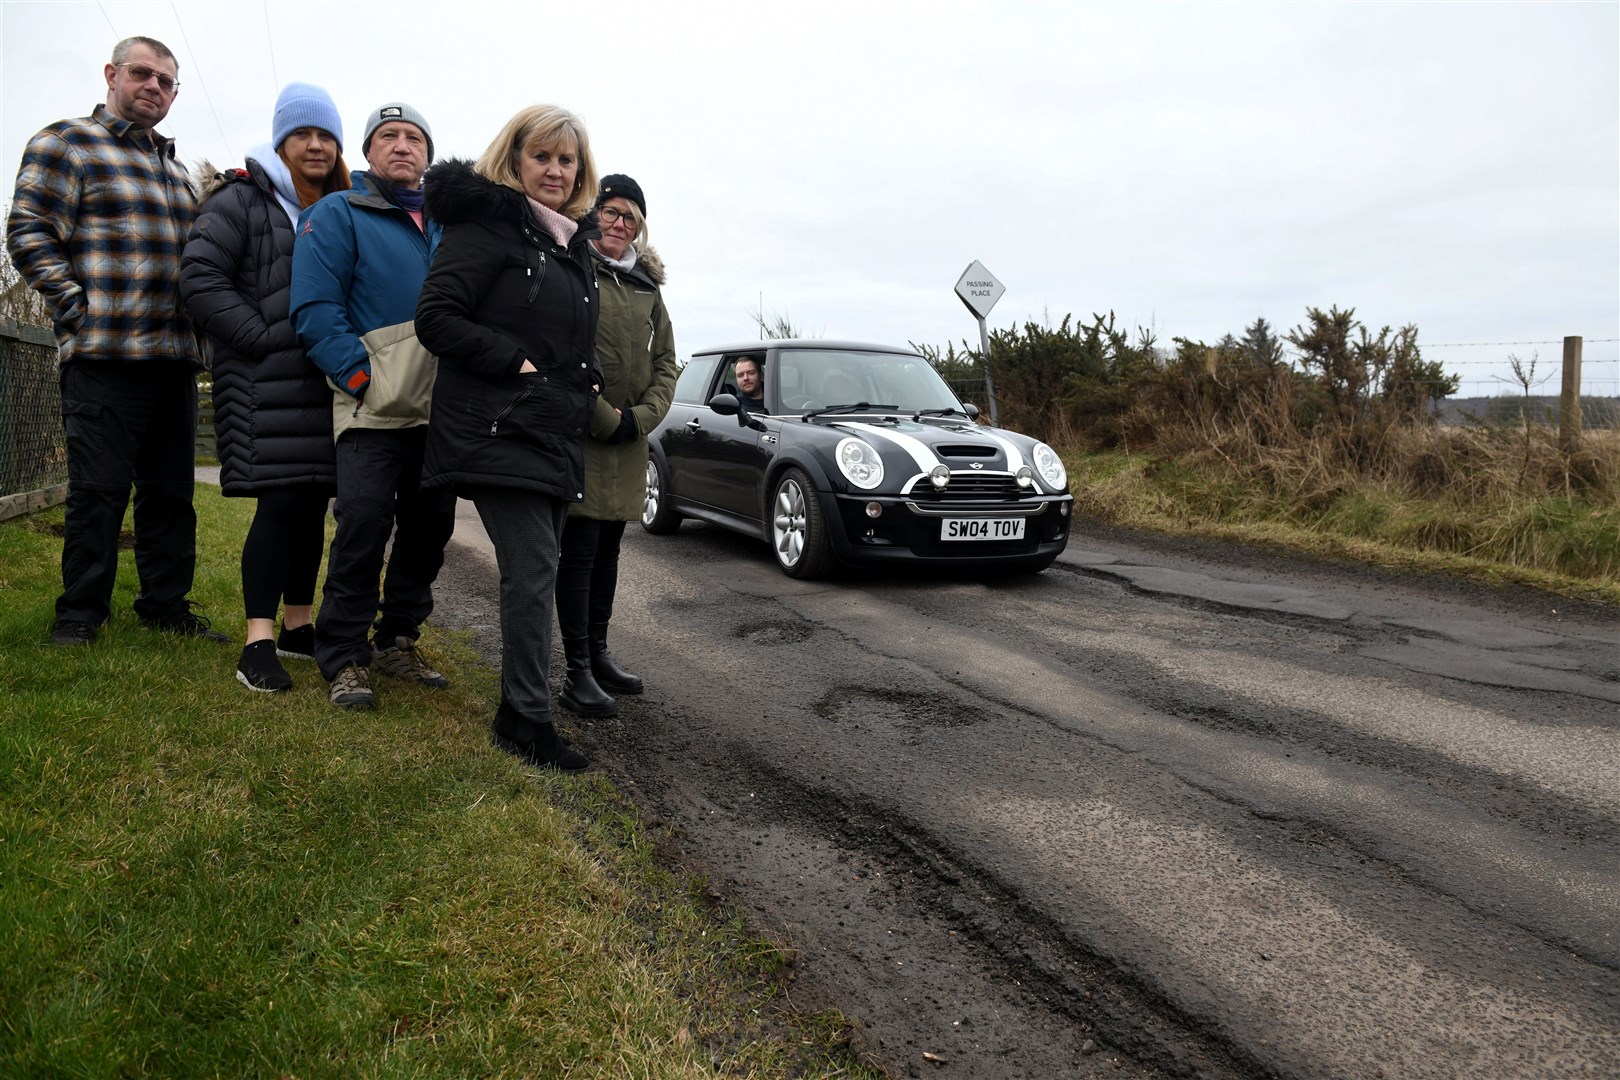 Paul McGowan, Catherine Macfarlane, Donnie Macfarlane, Ruth Donald, Clare Lancaster and Graeme Bremner are among local residents fed up with the dire condition of roads leading to Killen on the Black Isle. Picture: James Mackenzie.